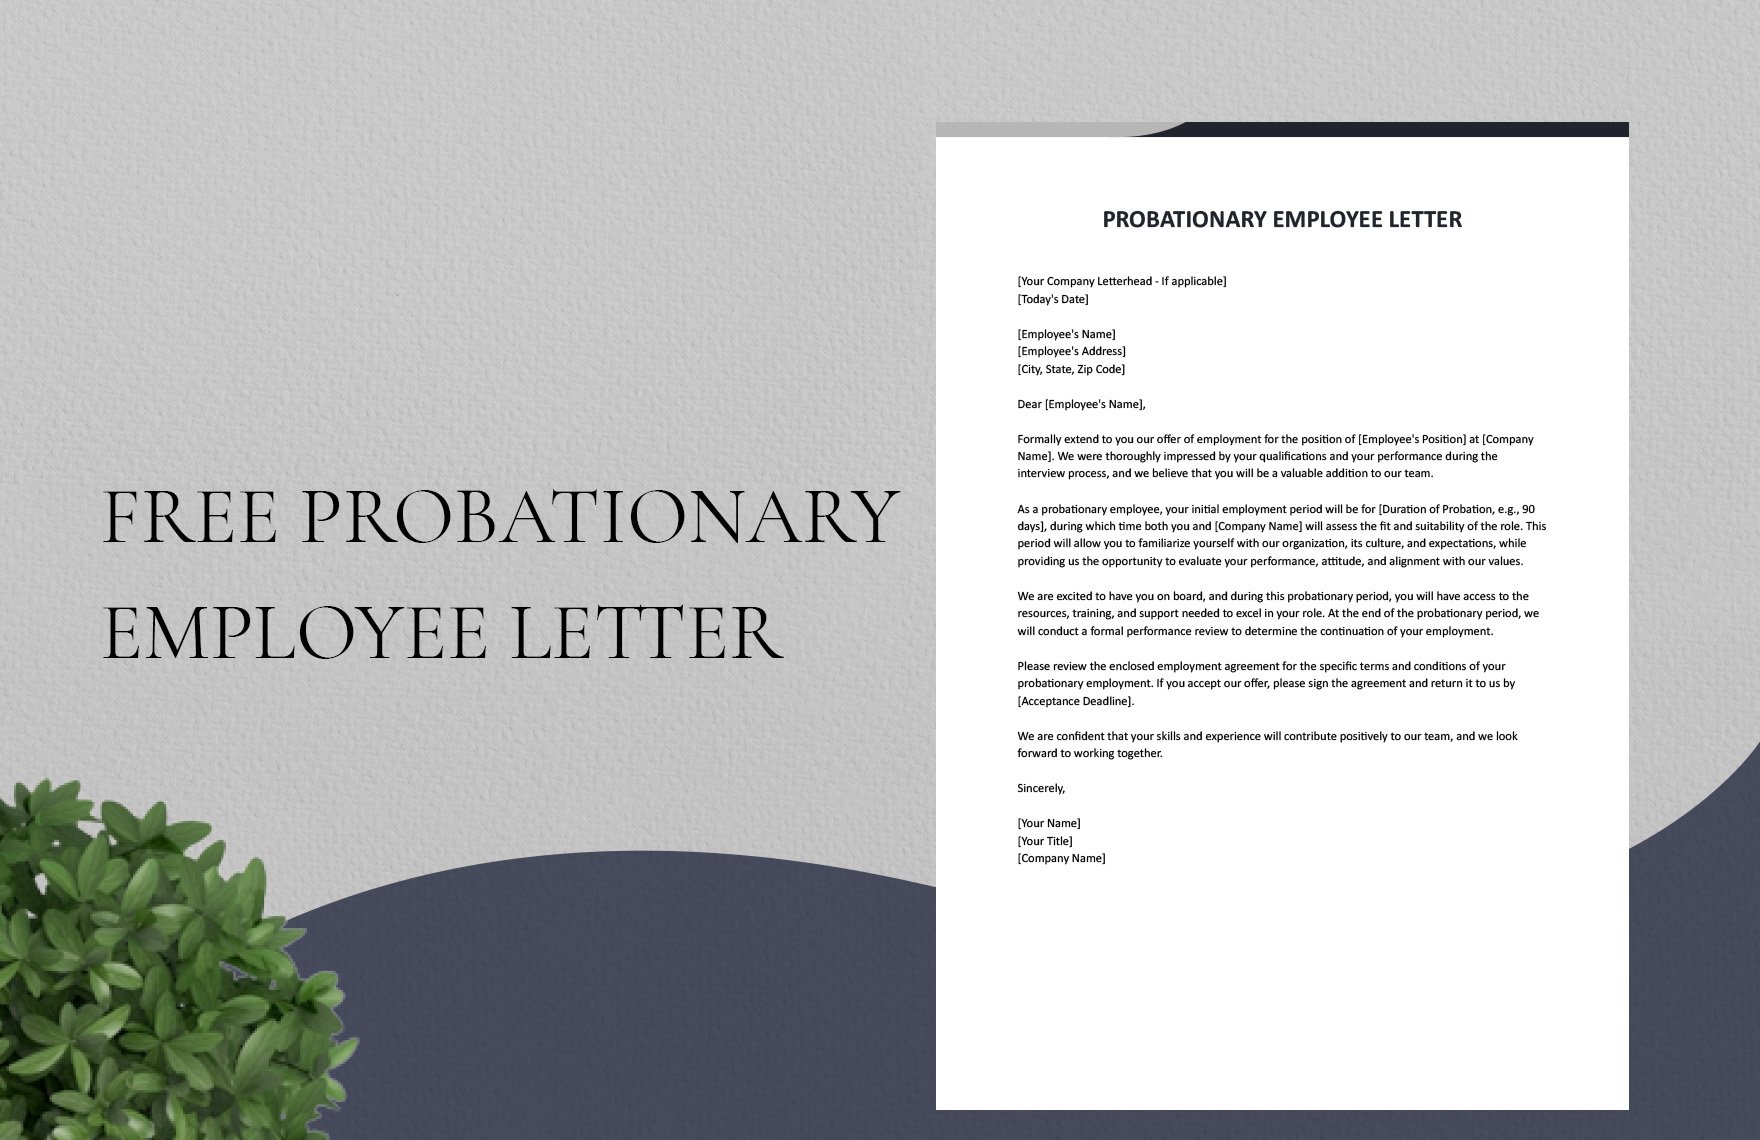 Probationary Employee Letter in Word, Google Docs